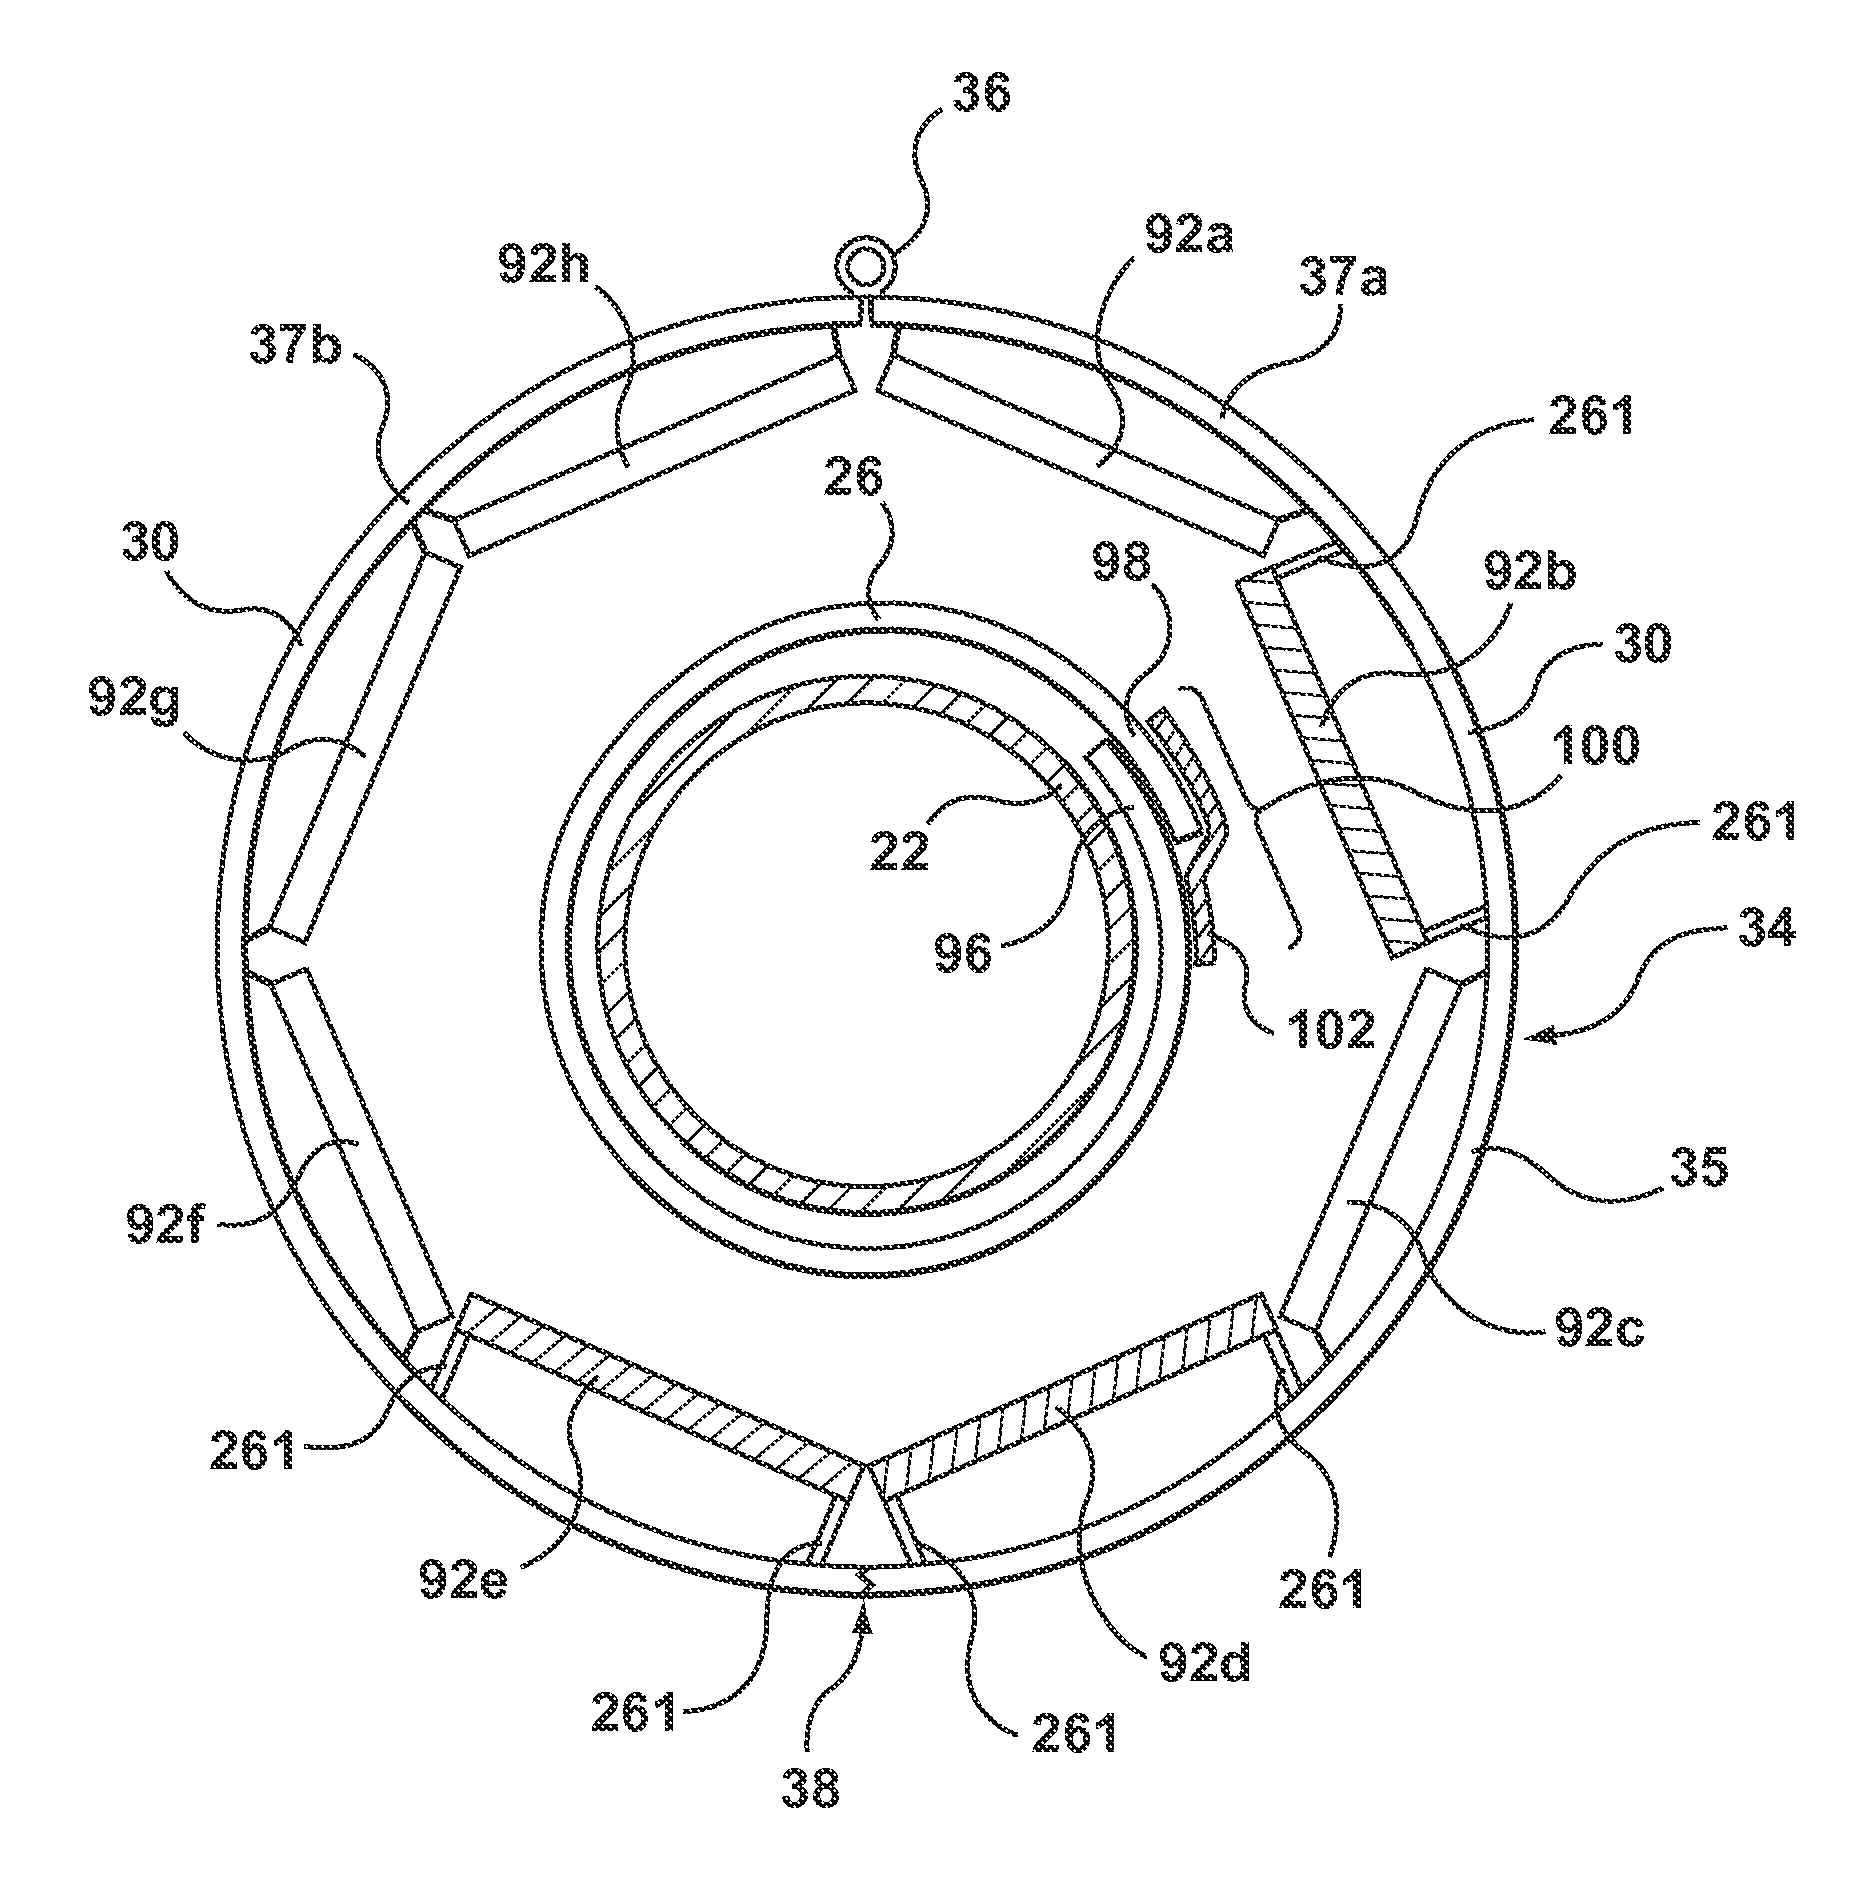 Apparatus containing multiple sequentially used infrared heating zones for tubular articles